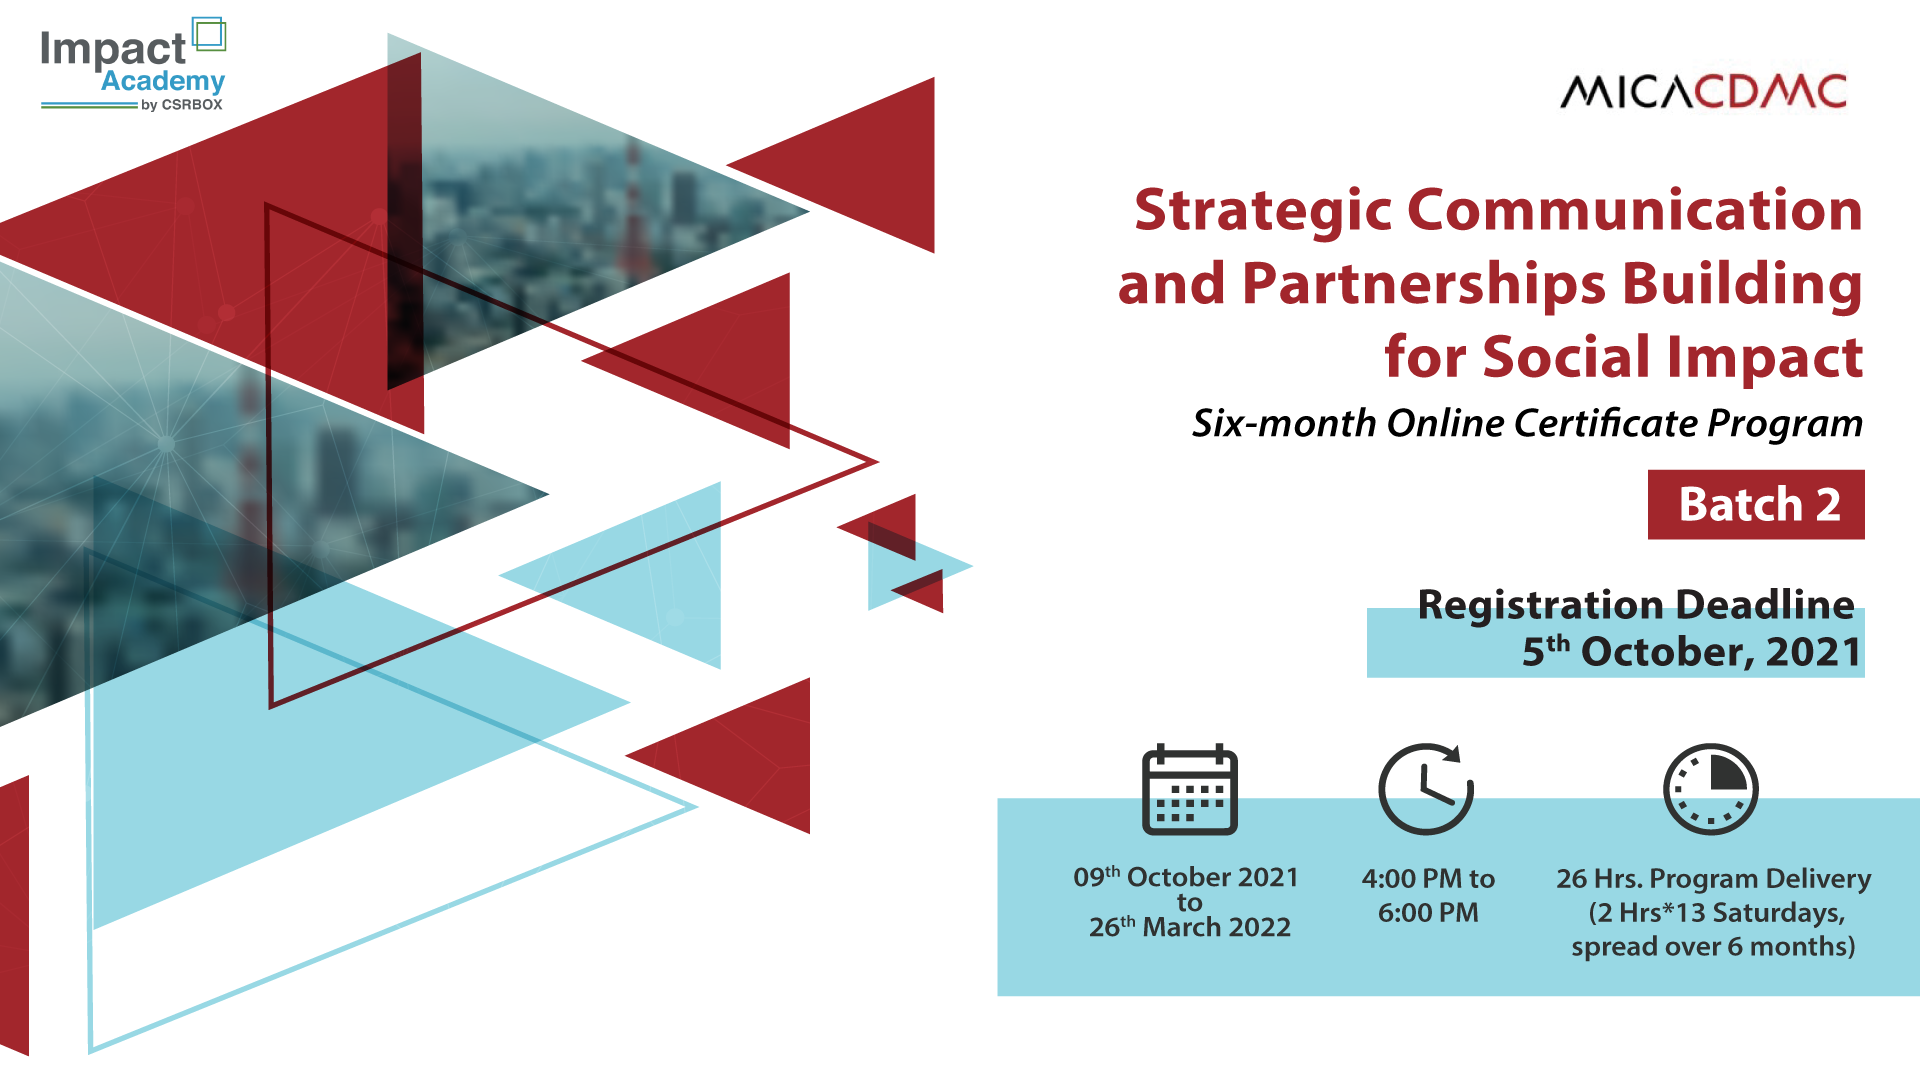 Strategic Communication and Partnerships Building for Social Impact Six-month Online Certicate Program, Ahmedabad, Gujarat, India